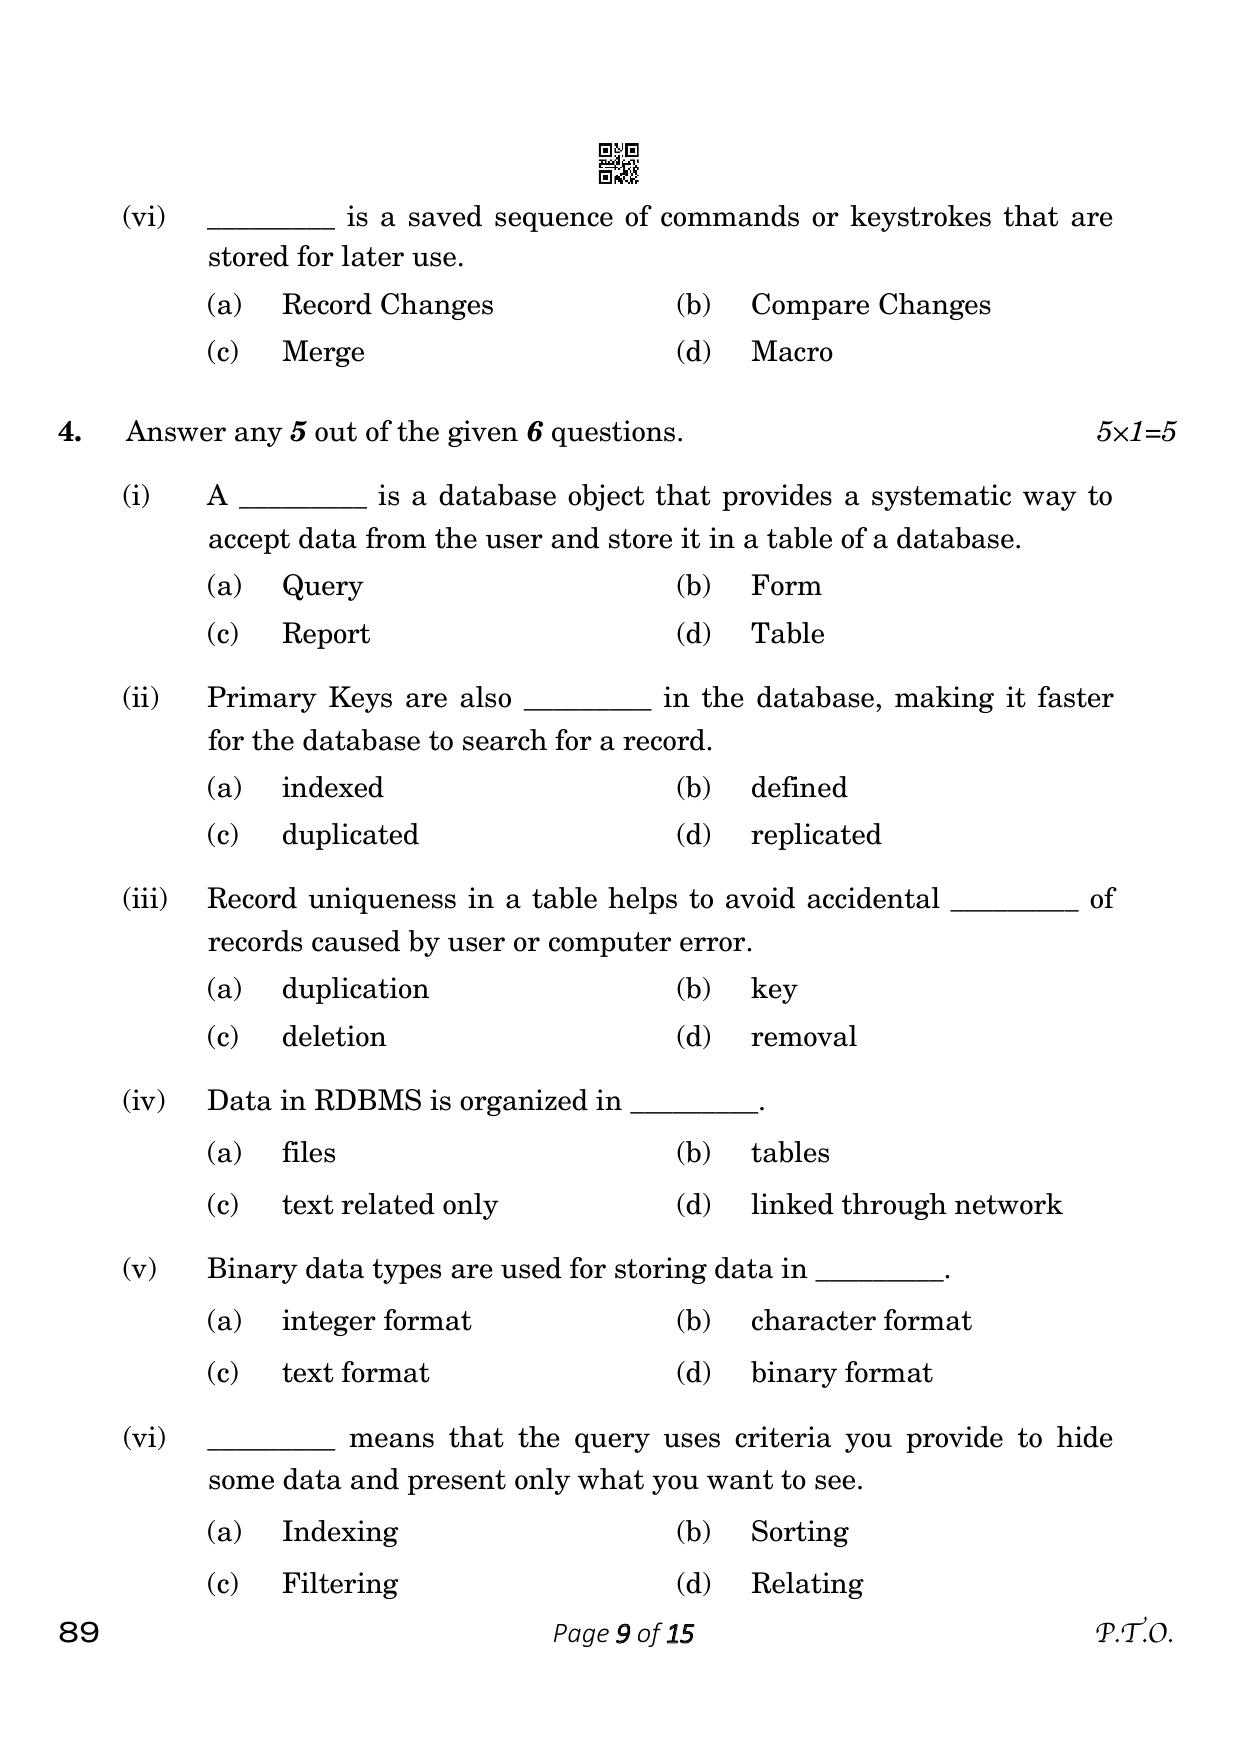 CBSE Class 10 Information Technology (Compartment) 2023 Question Paper - Page 9